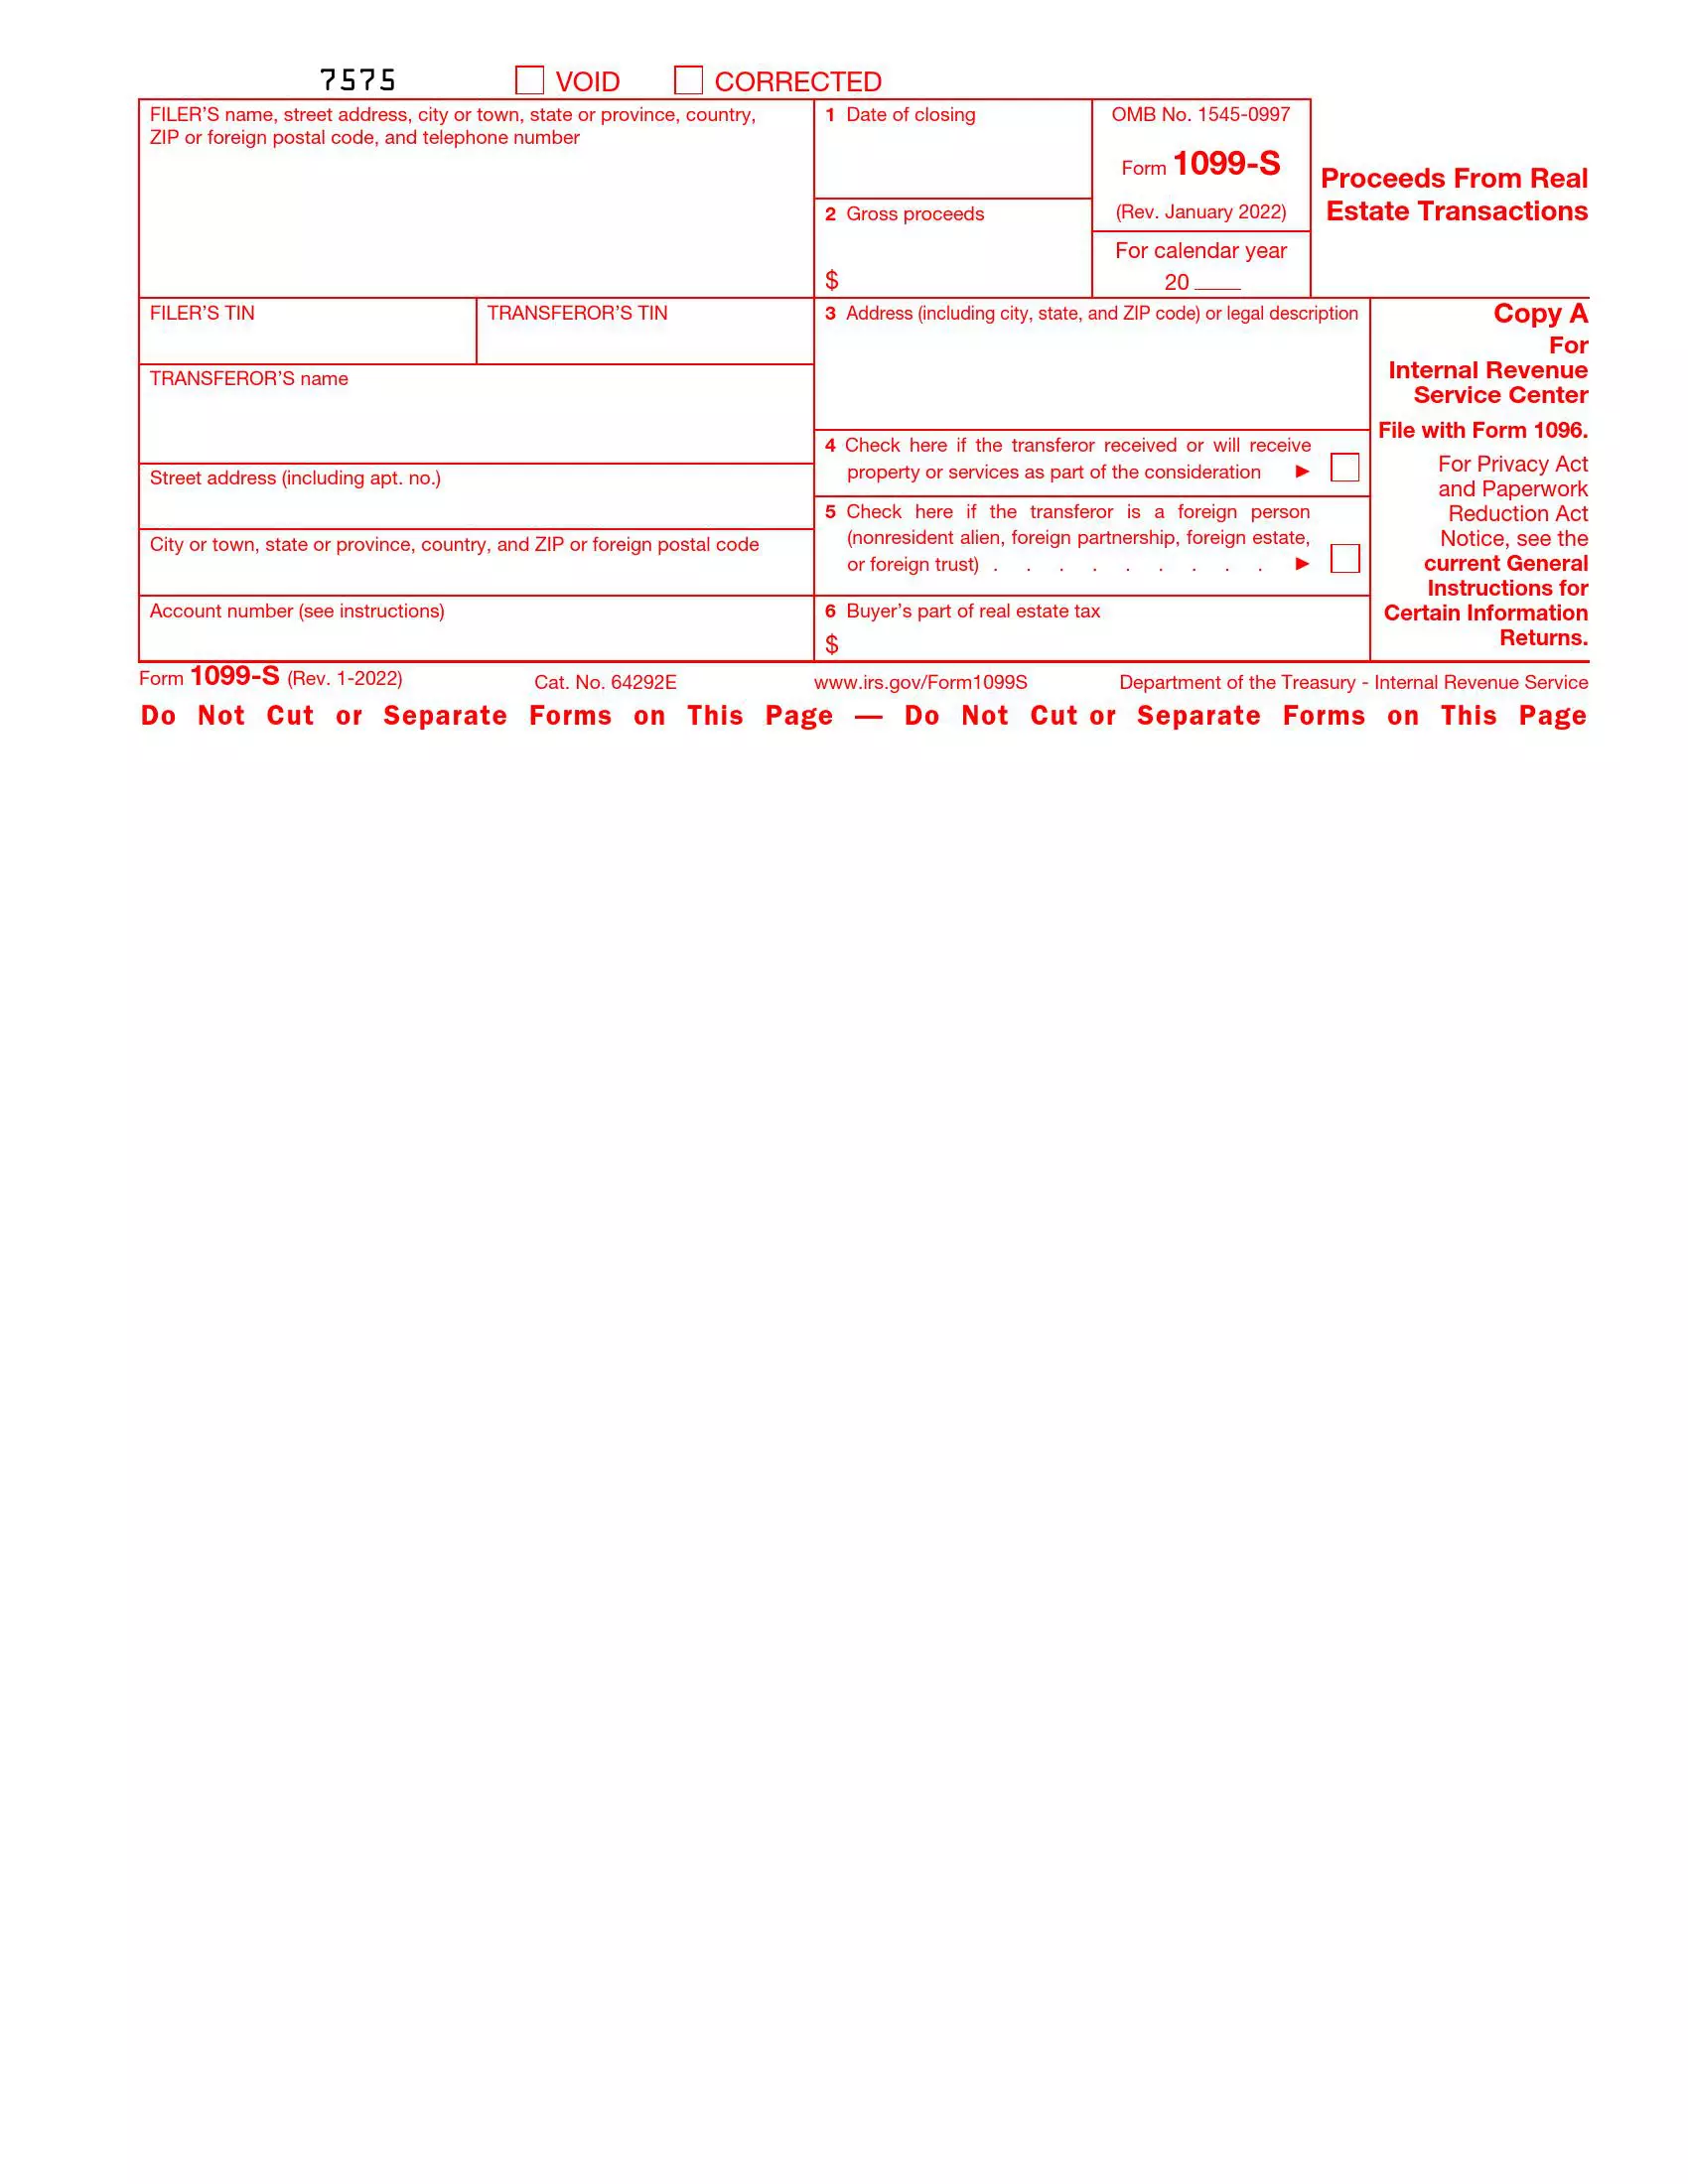 irs form 1099 s rev 01 2022 preview